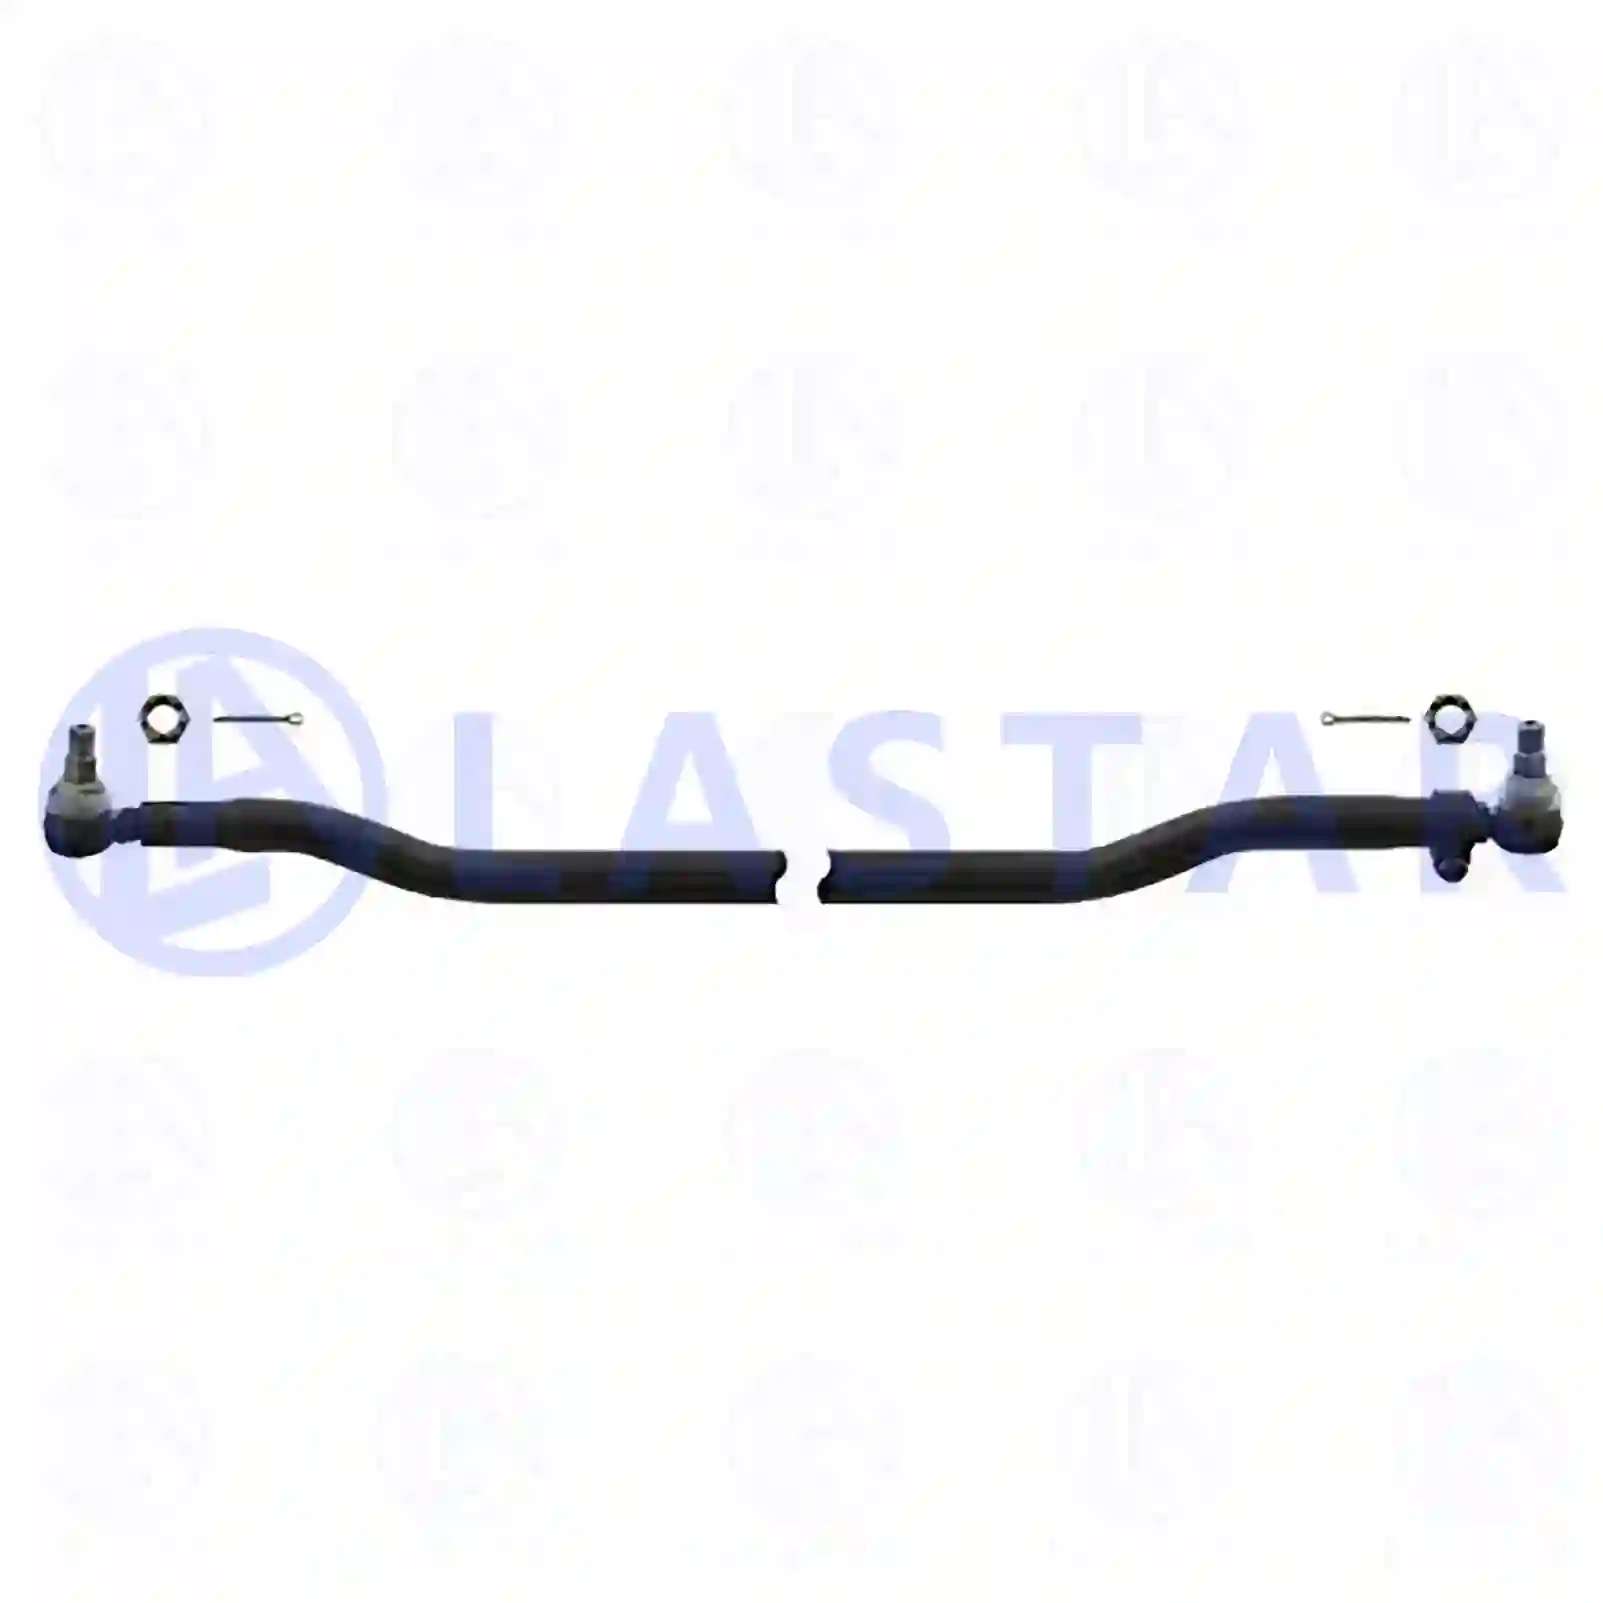 Track rod, 77730294, 81467106994, 81467116726, , ||  77730294 Lastar Spare Part | Truck Spare Parts, Auotomotive Spare Parts Track rod, 77730294, 81467106994, 81467116726, , ||  77730294 Lastar Spare Part | Truck Spare Parts, Auotomotive Spare Parts